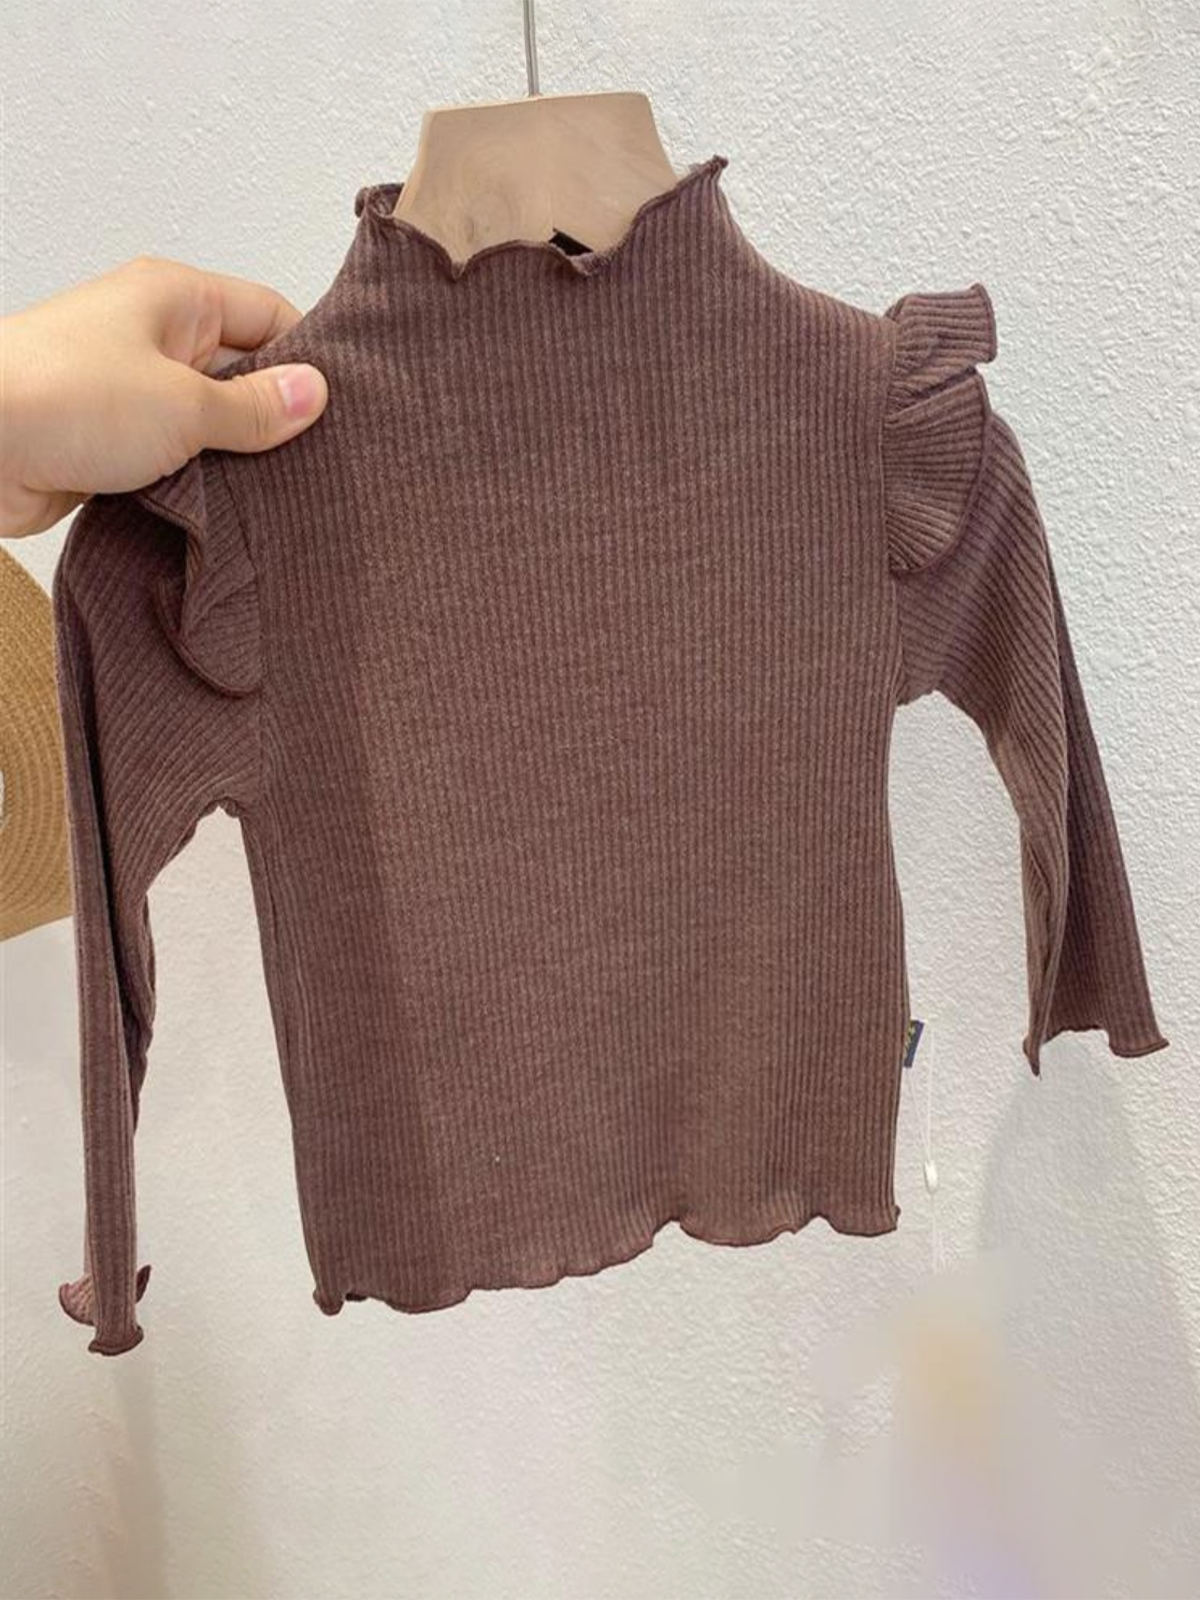 Toddler Clothing Sale | Ruffle Shoulder Scallop Top | Girls Boutique ...